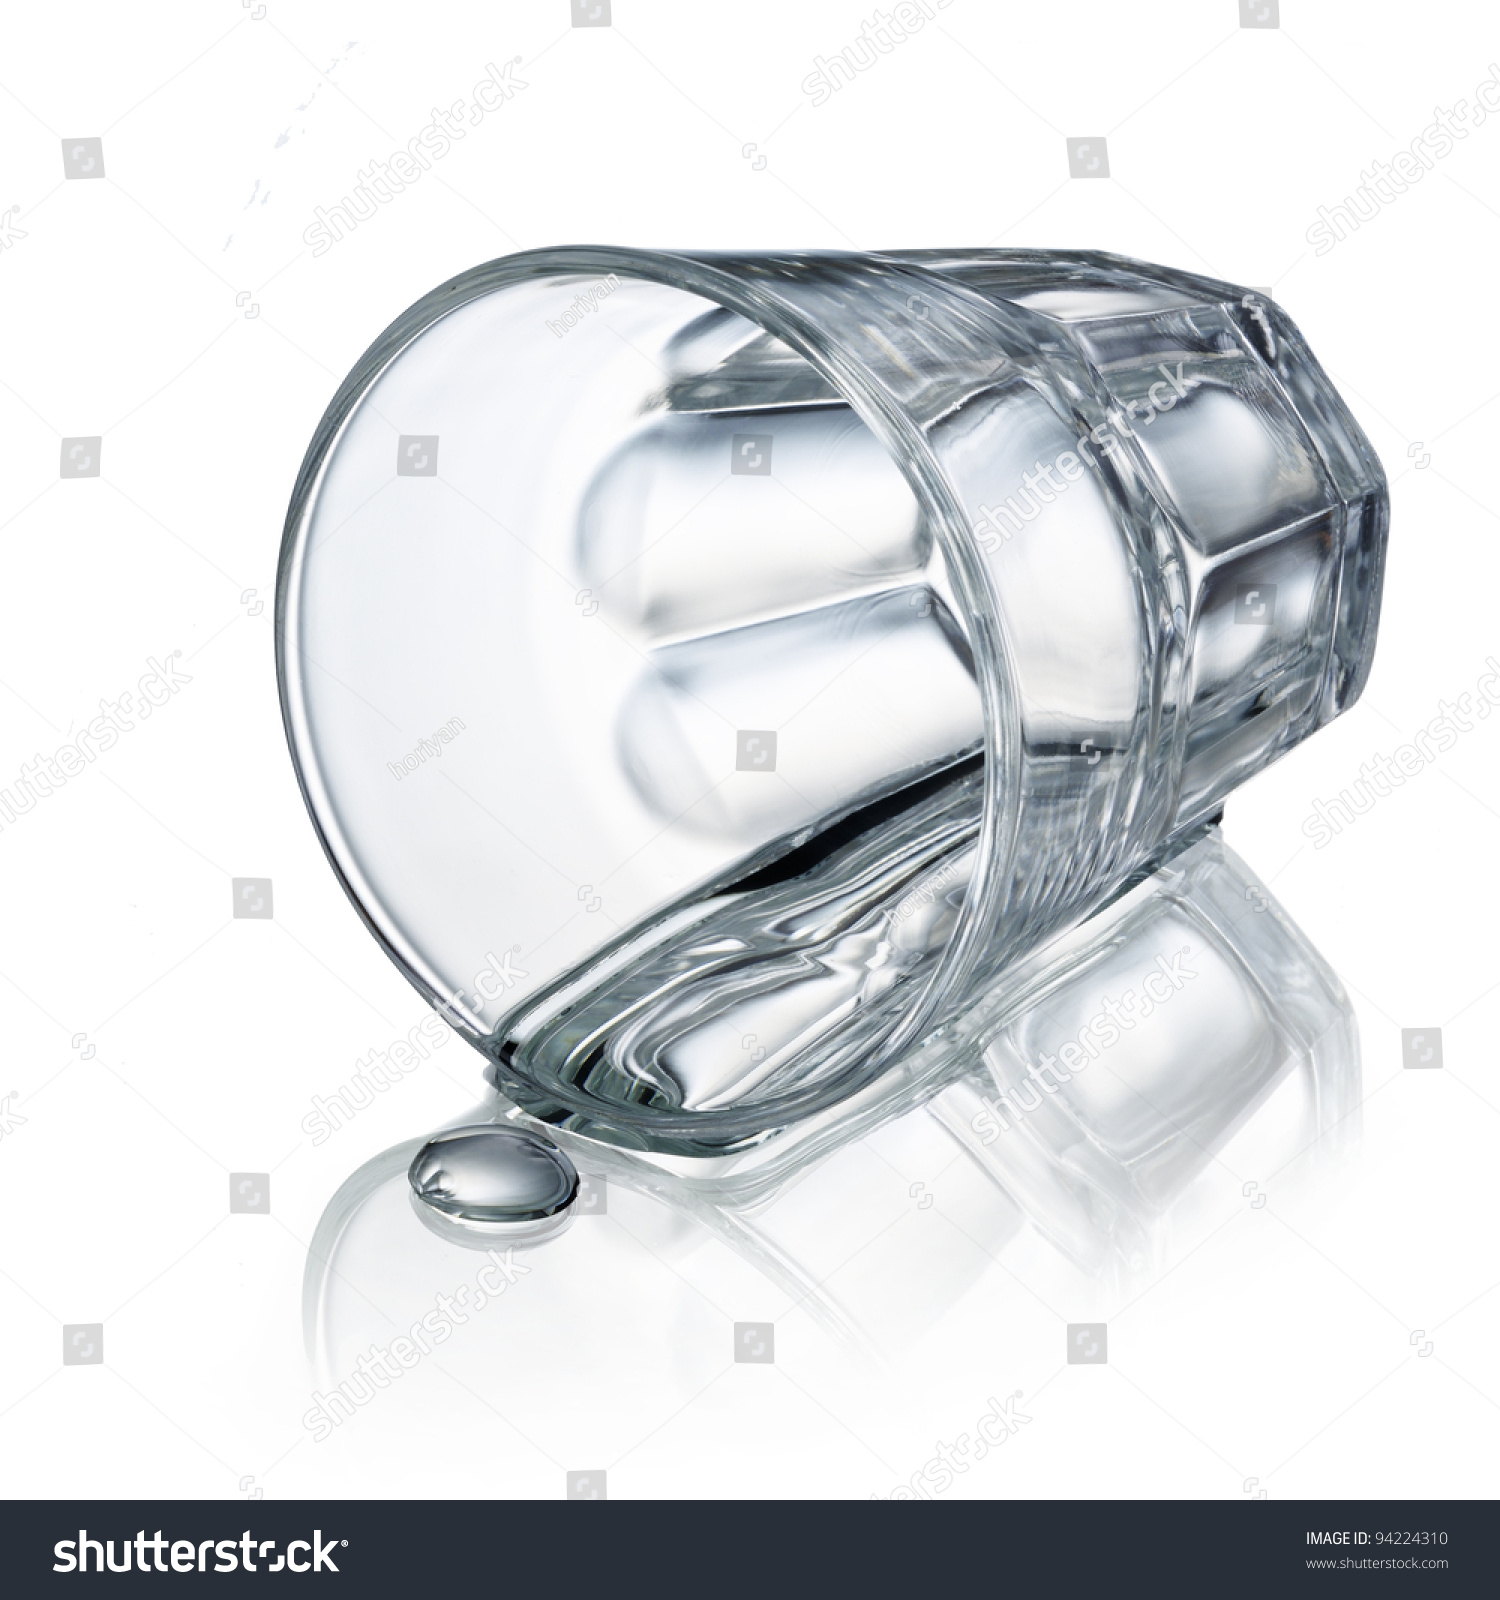 stock-photo-spilled-water-glass-94224310